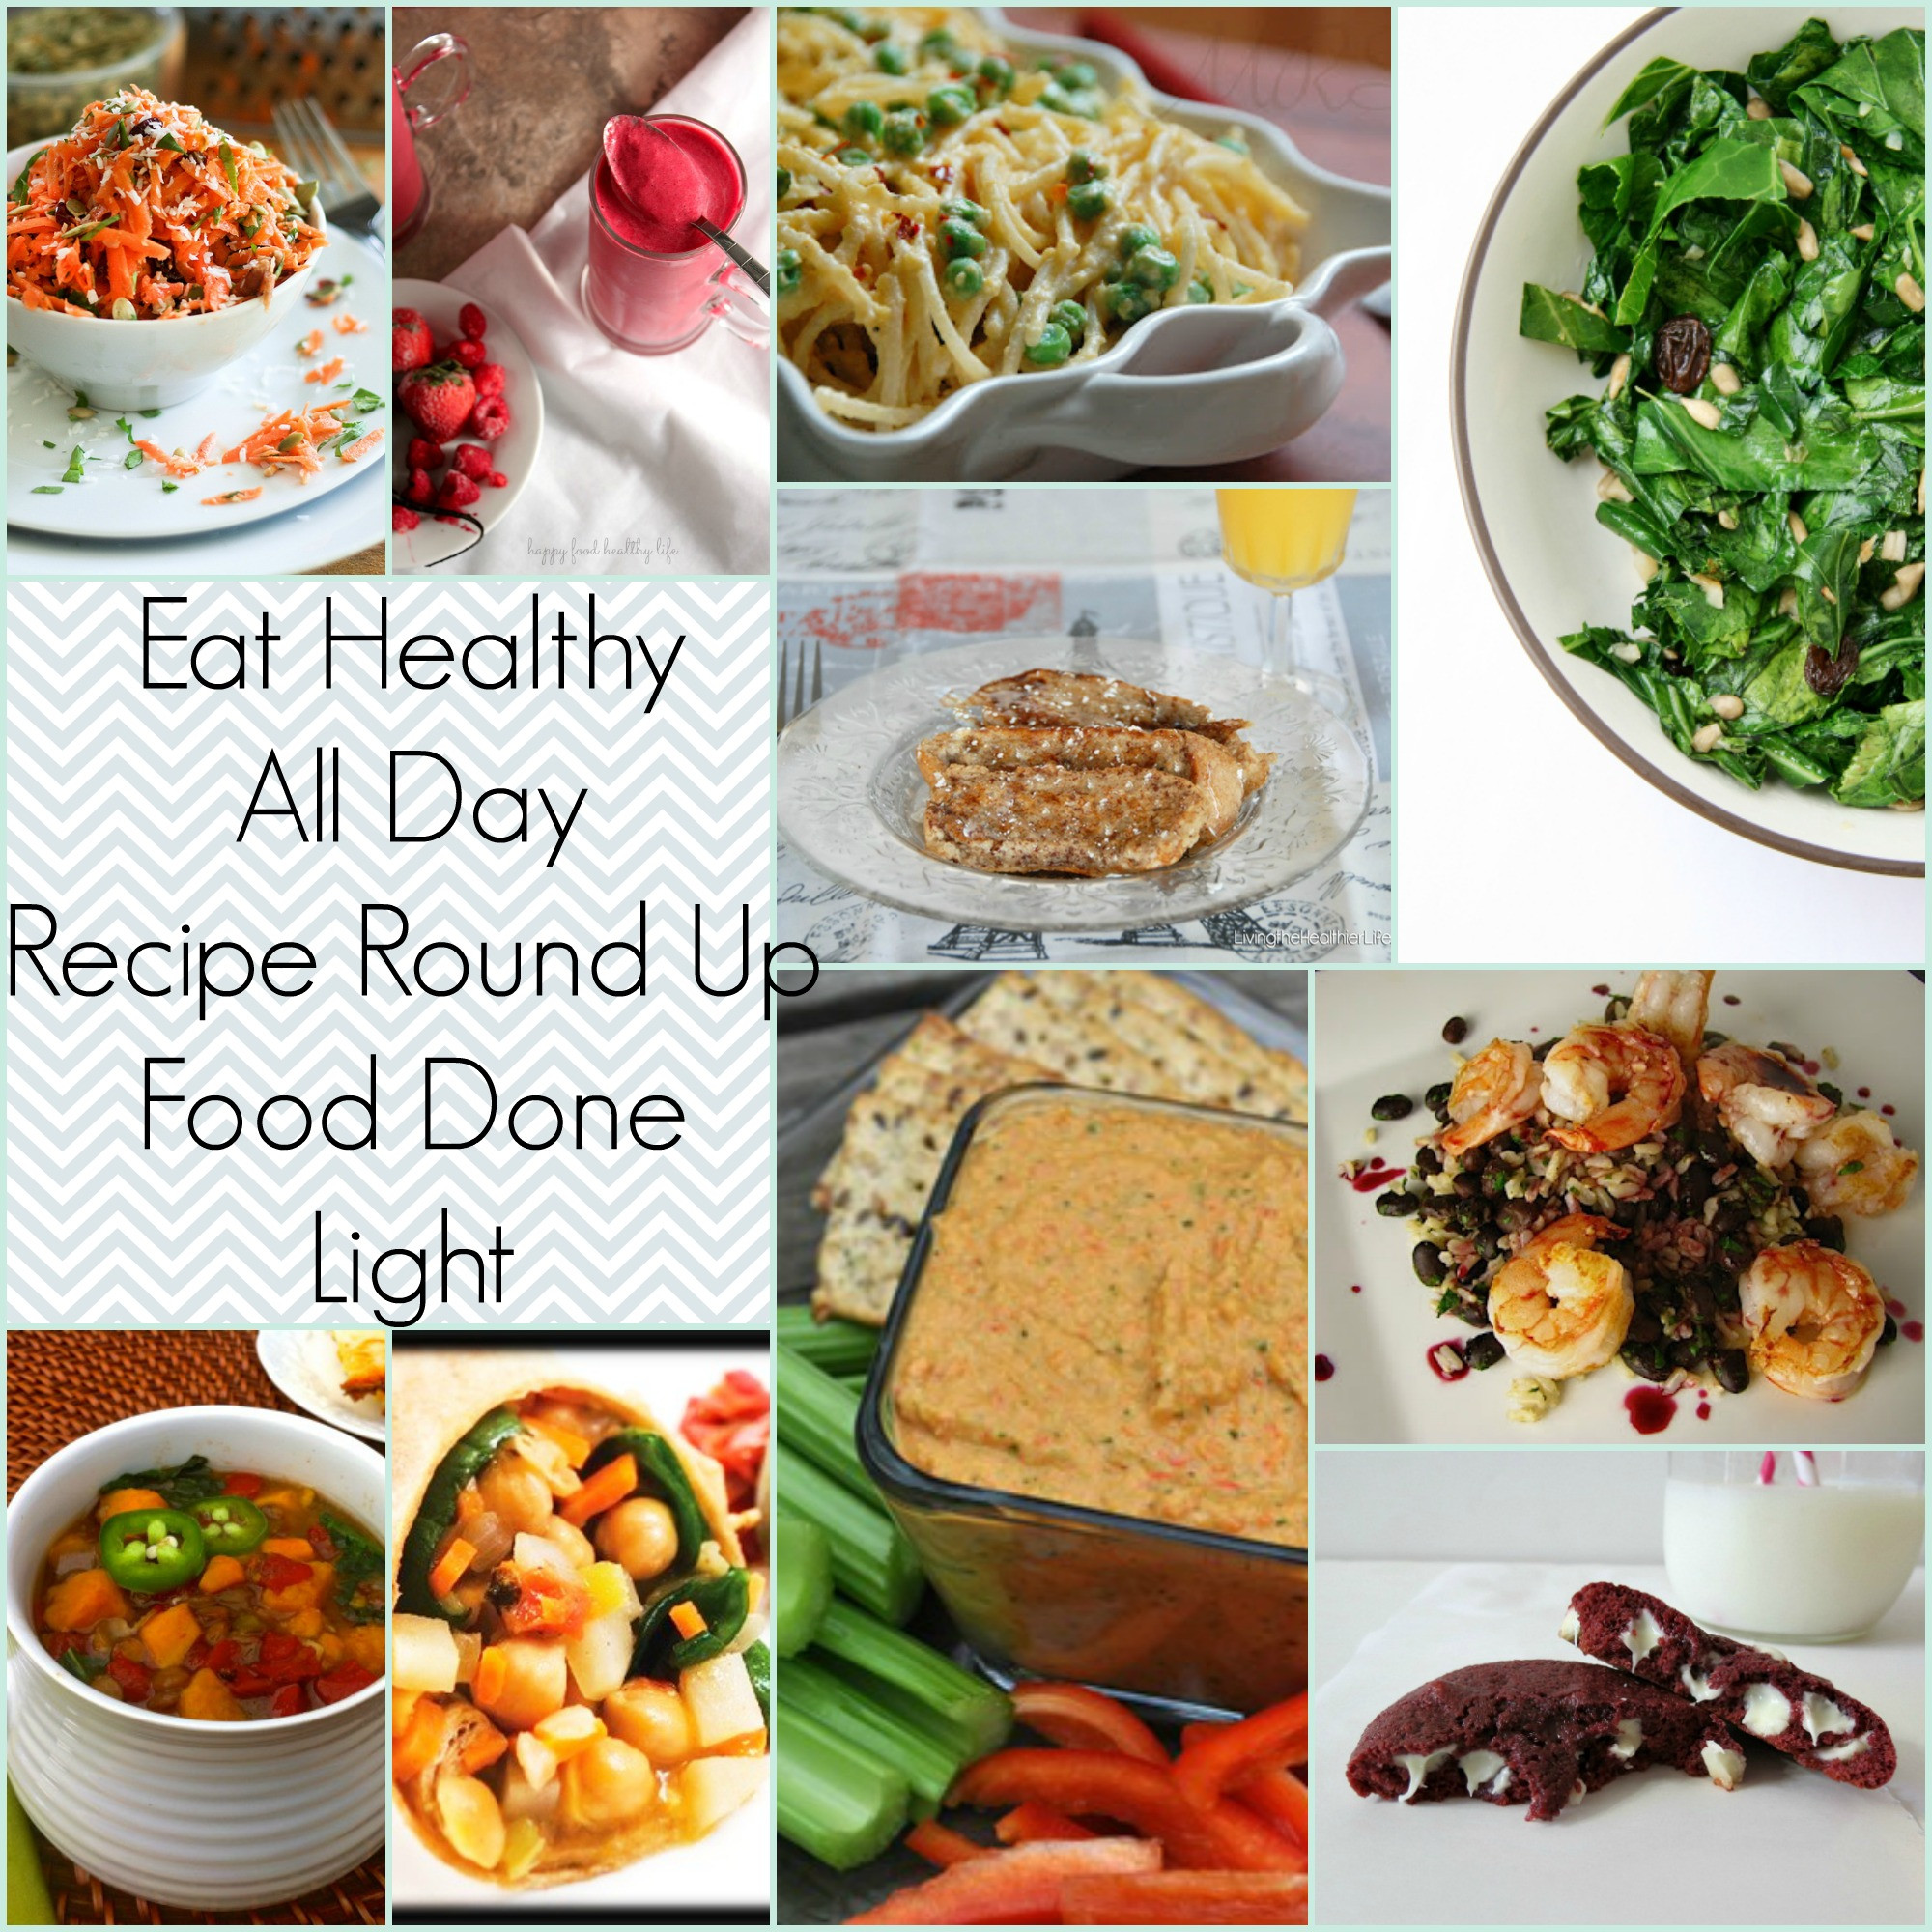 Healthy Breakfast And Lunch Ideas
 Eat Healthy All Day Recipe Round Up